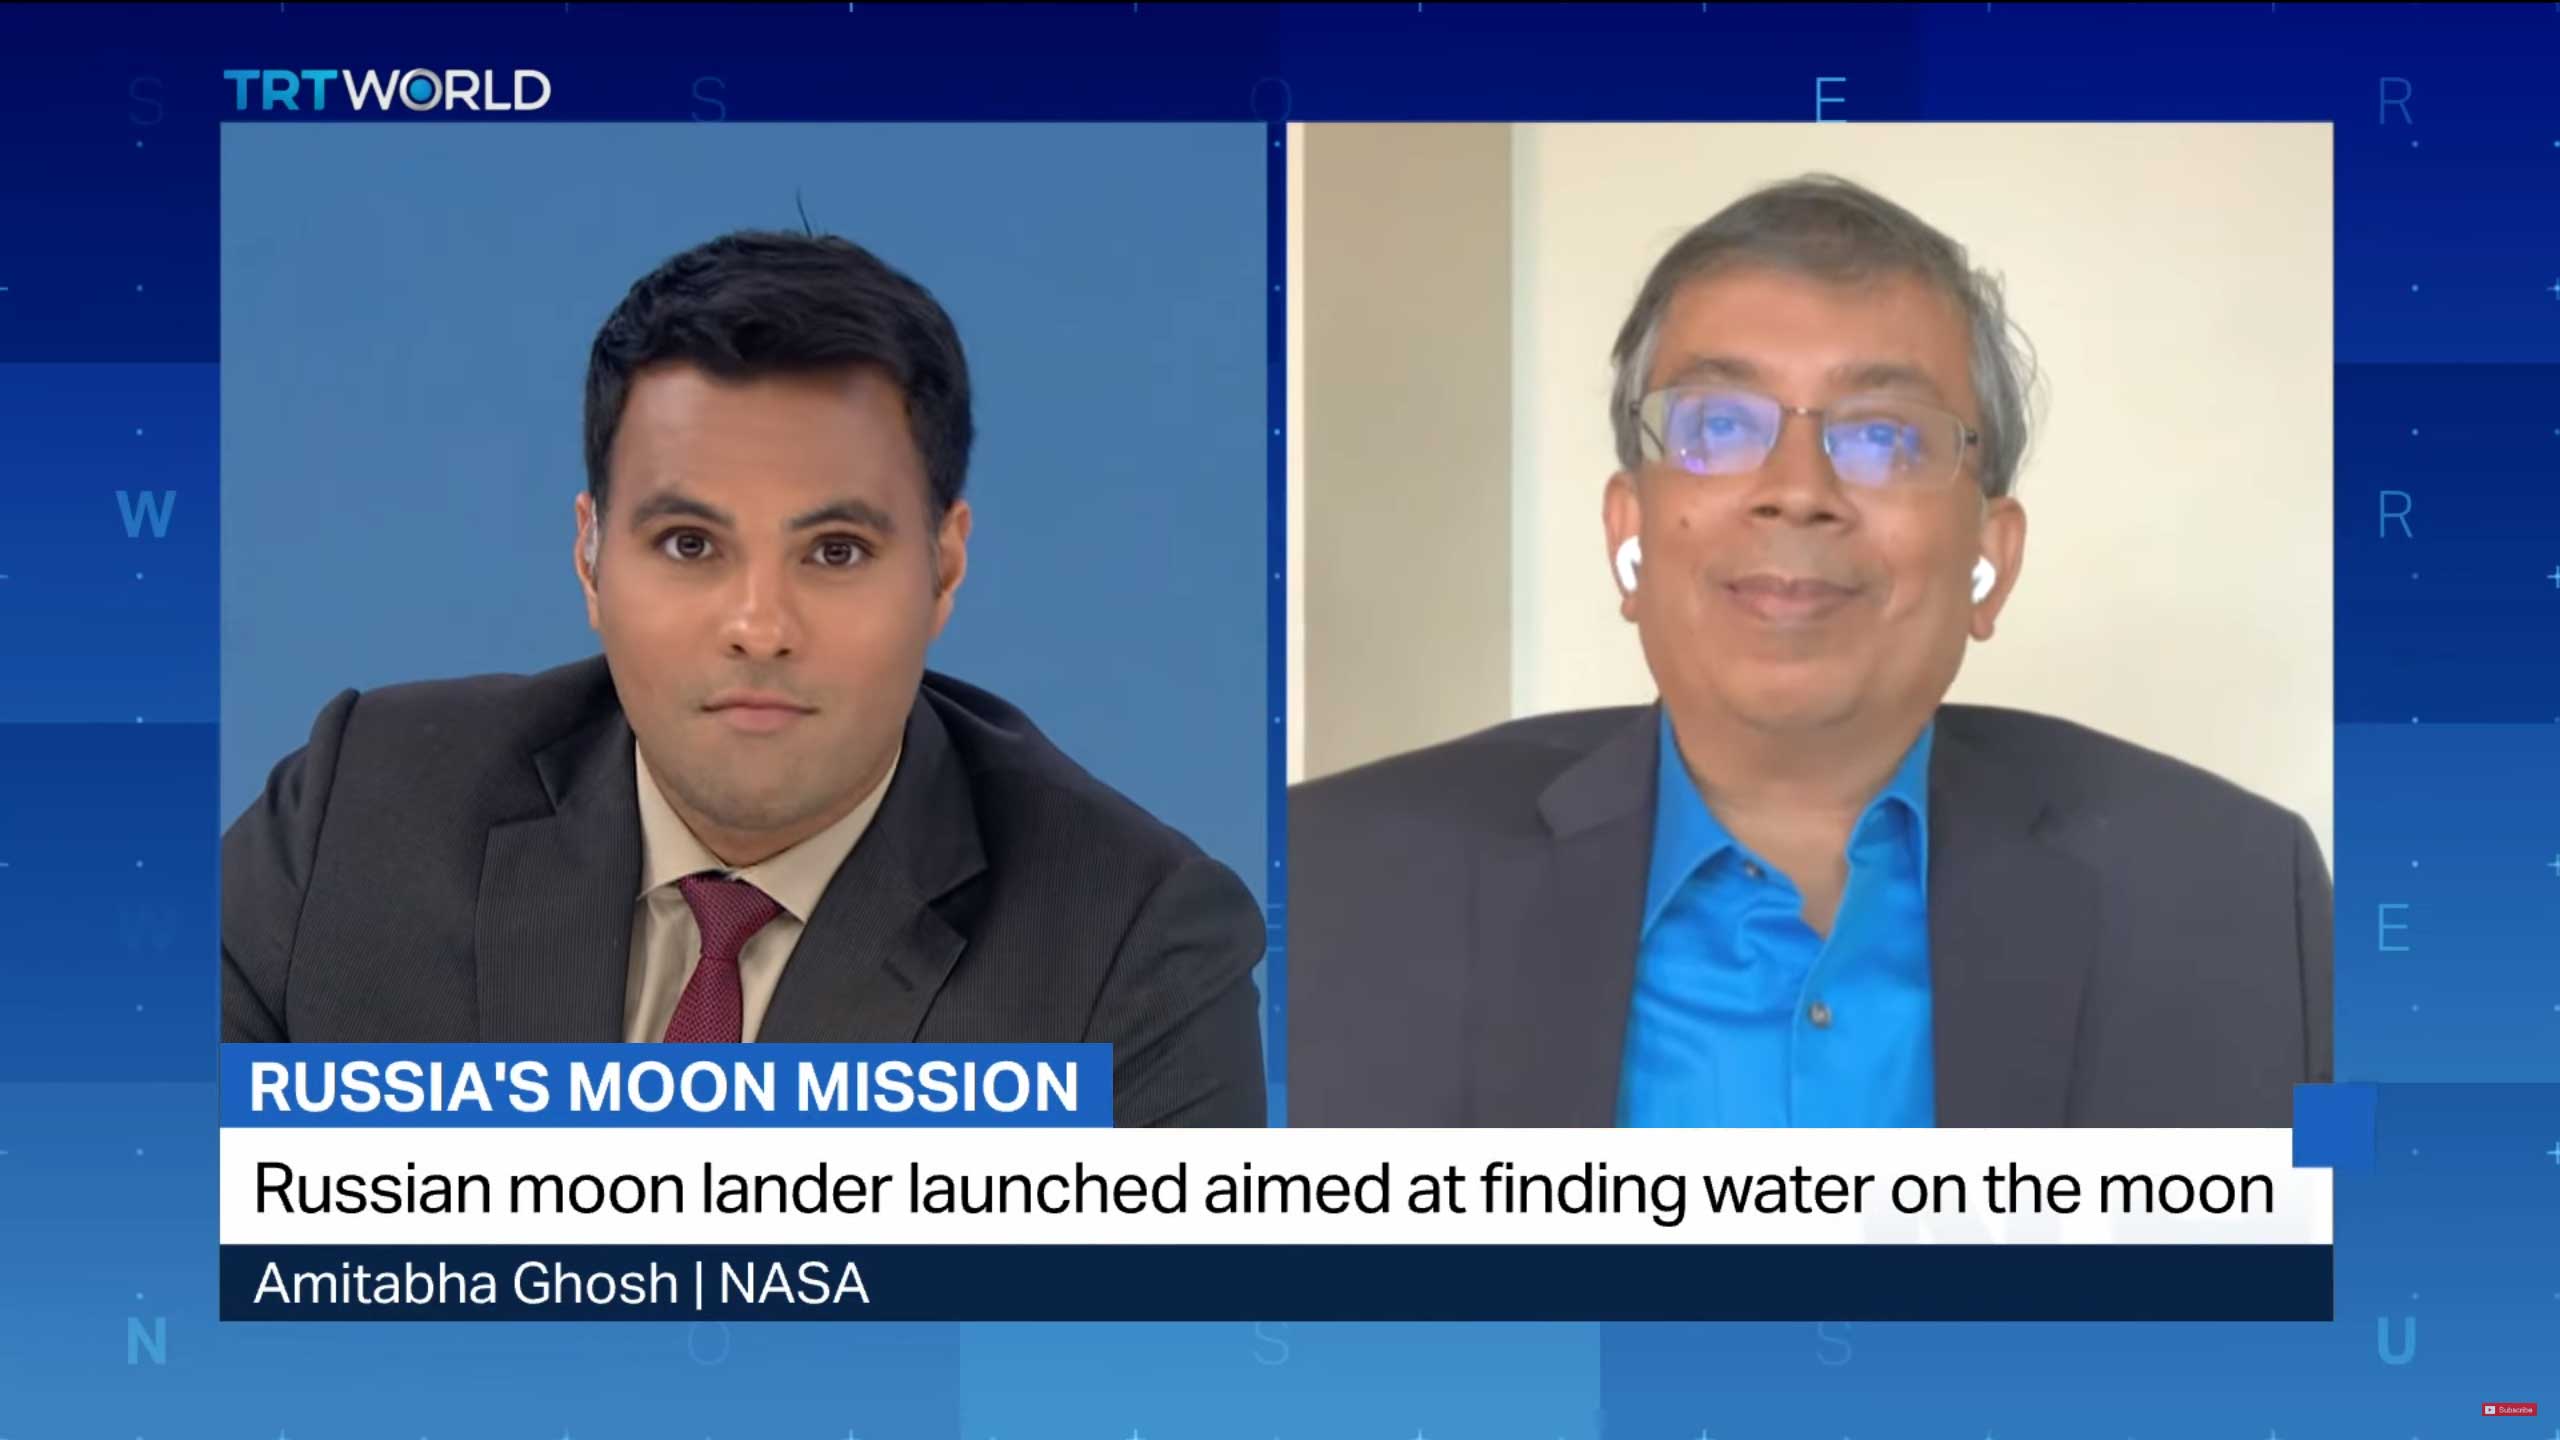 Dr. Amitabh Ghosh, a NASA Scientist and Advisor RLaCM interviewed by TRT World Now on lunar missions on the South Pole of the Moon